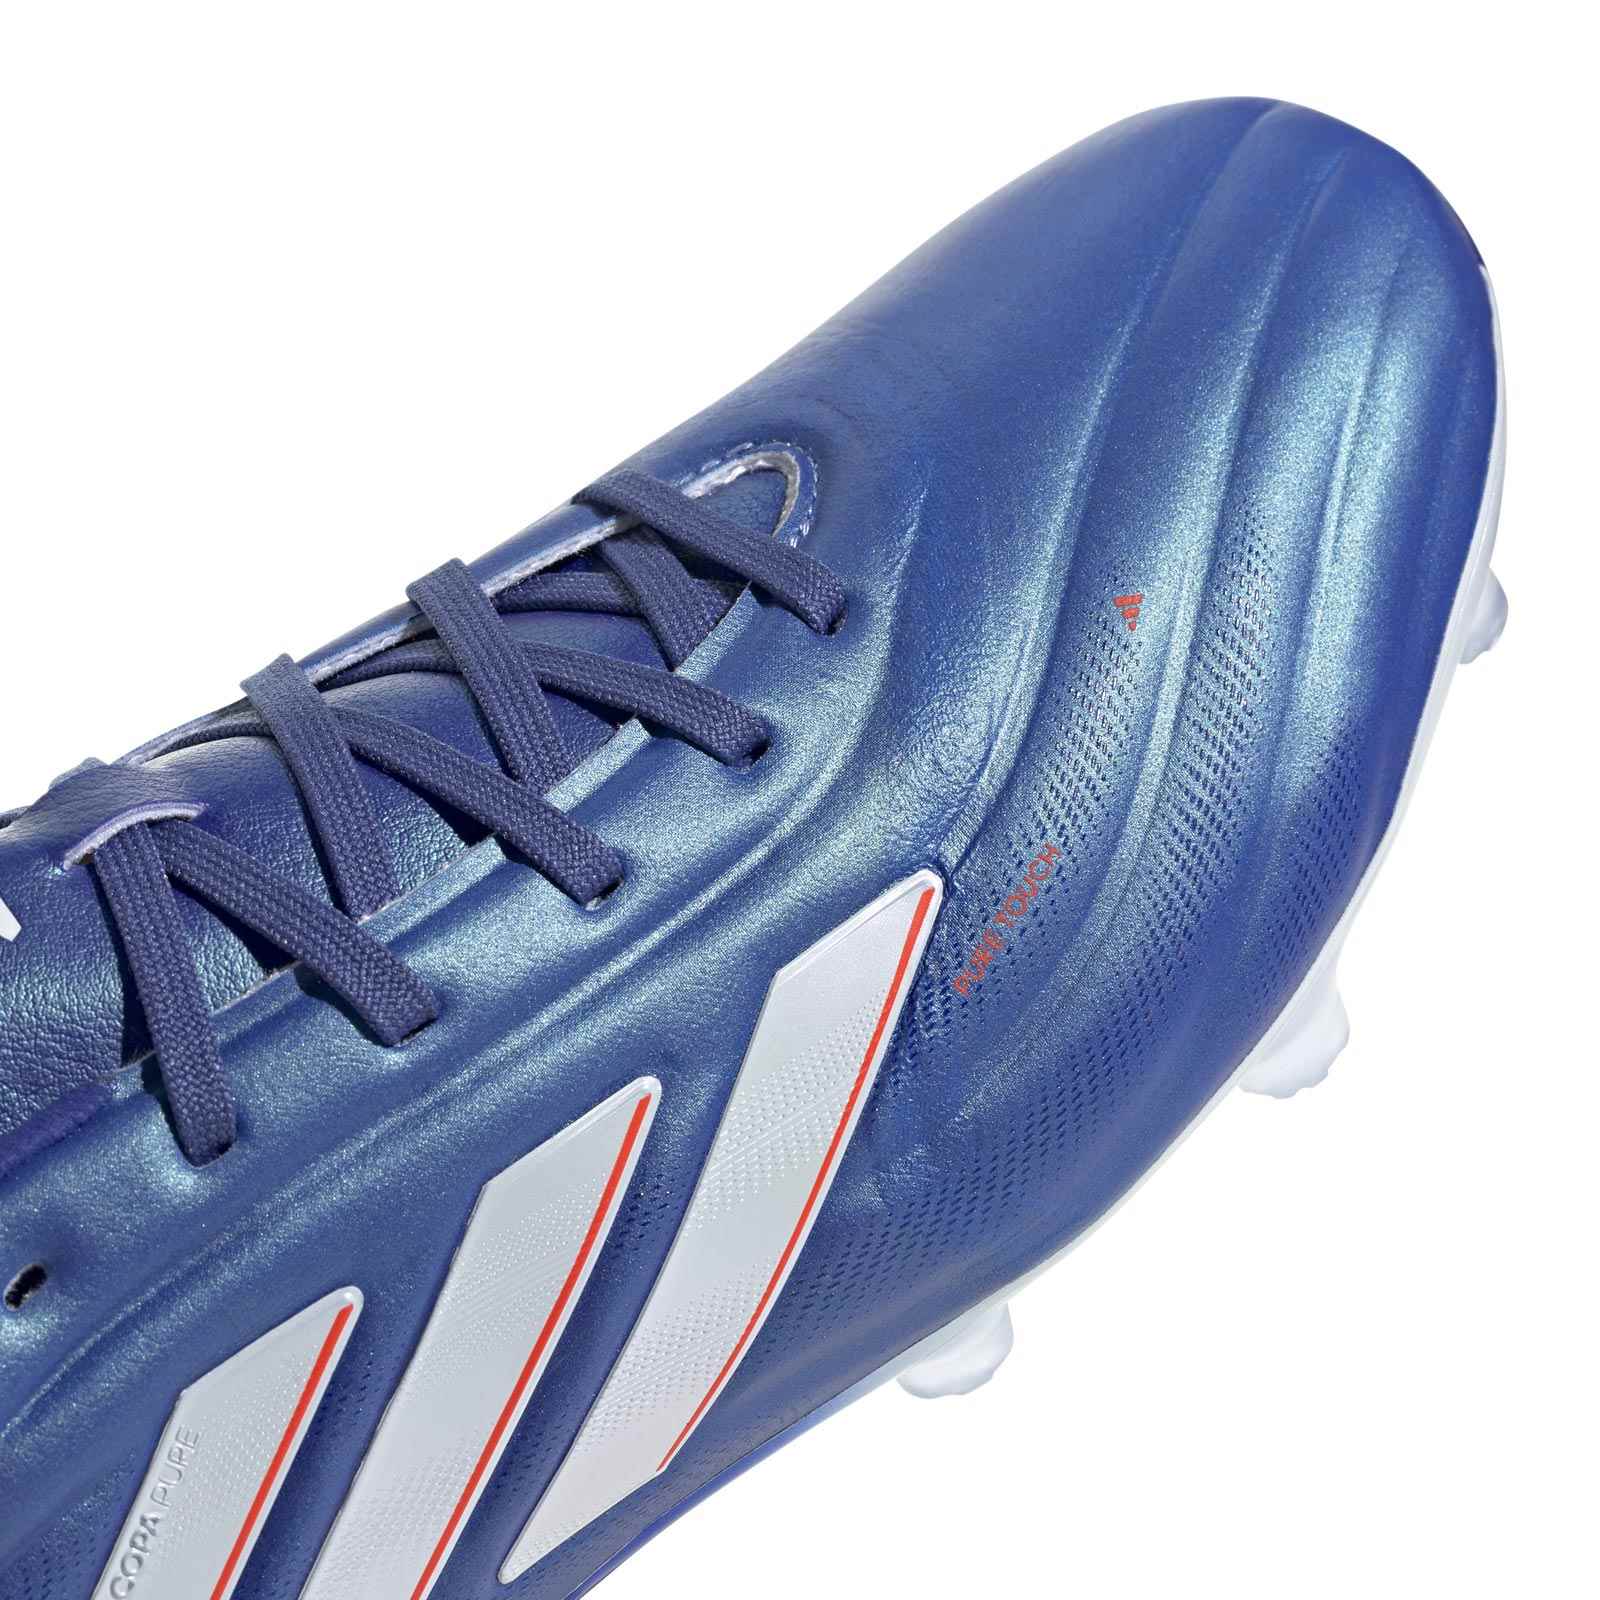 adidas Copa Pure 2.2 Firm Ground Boots